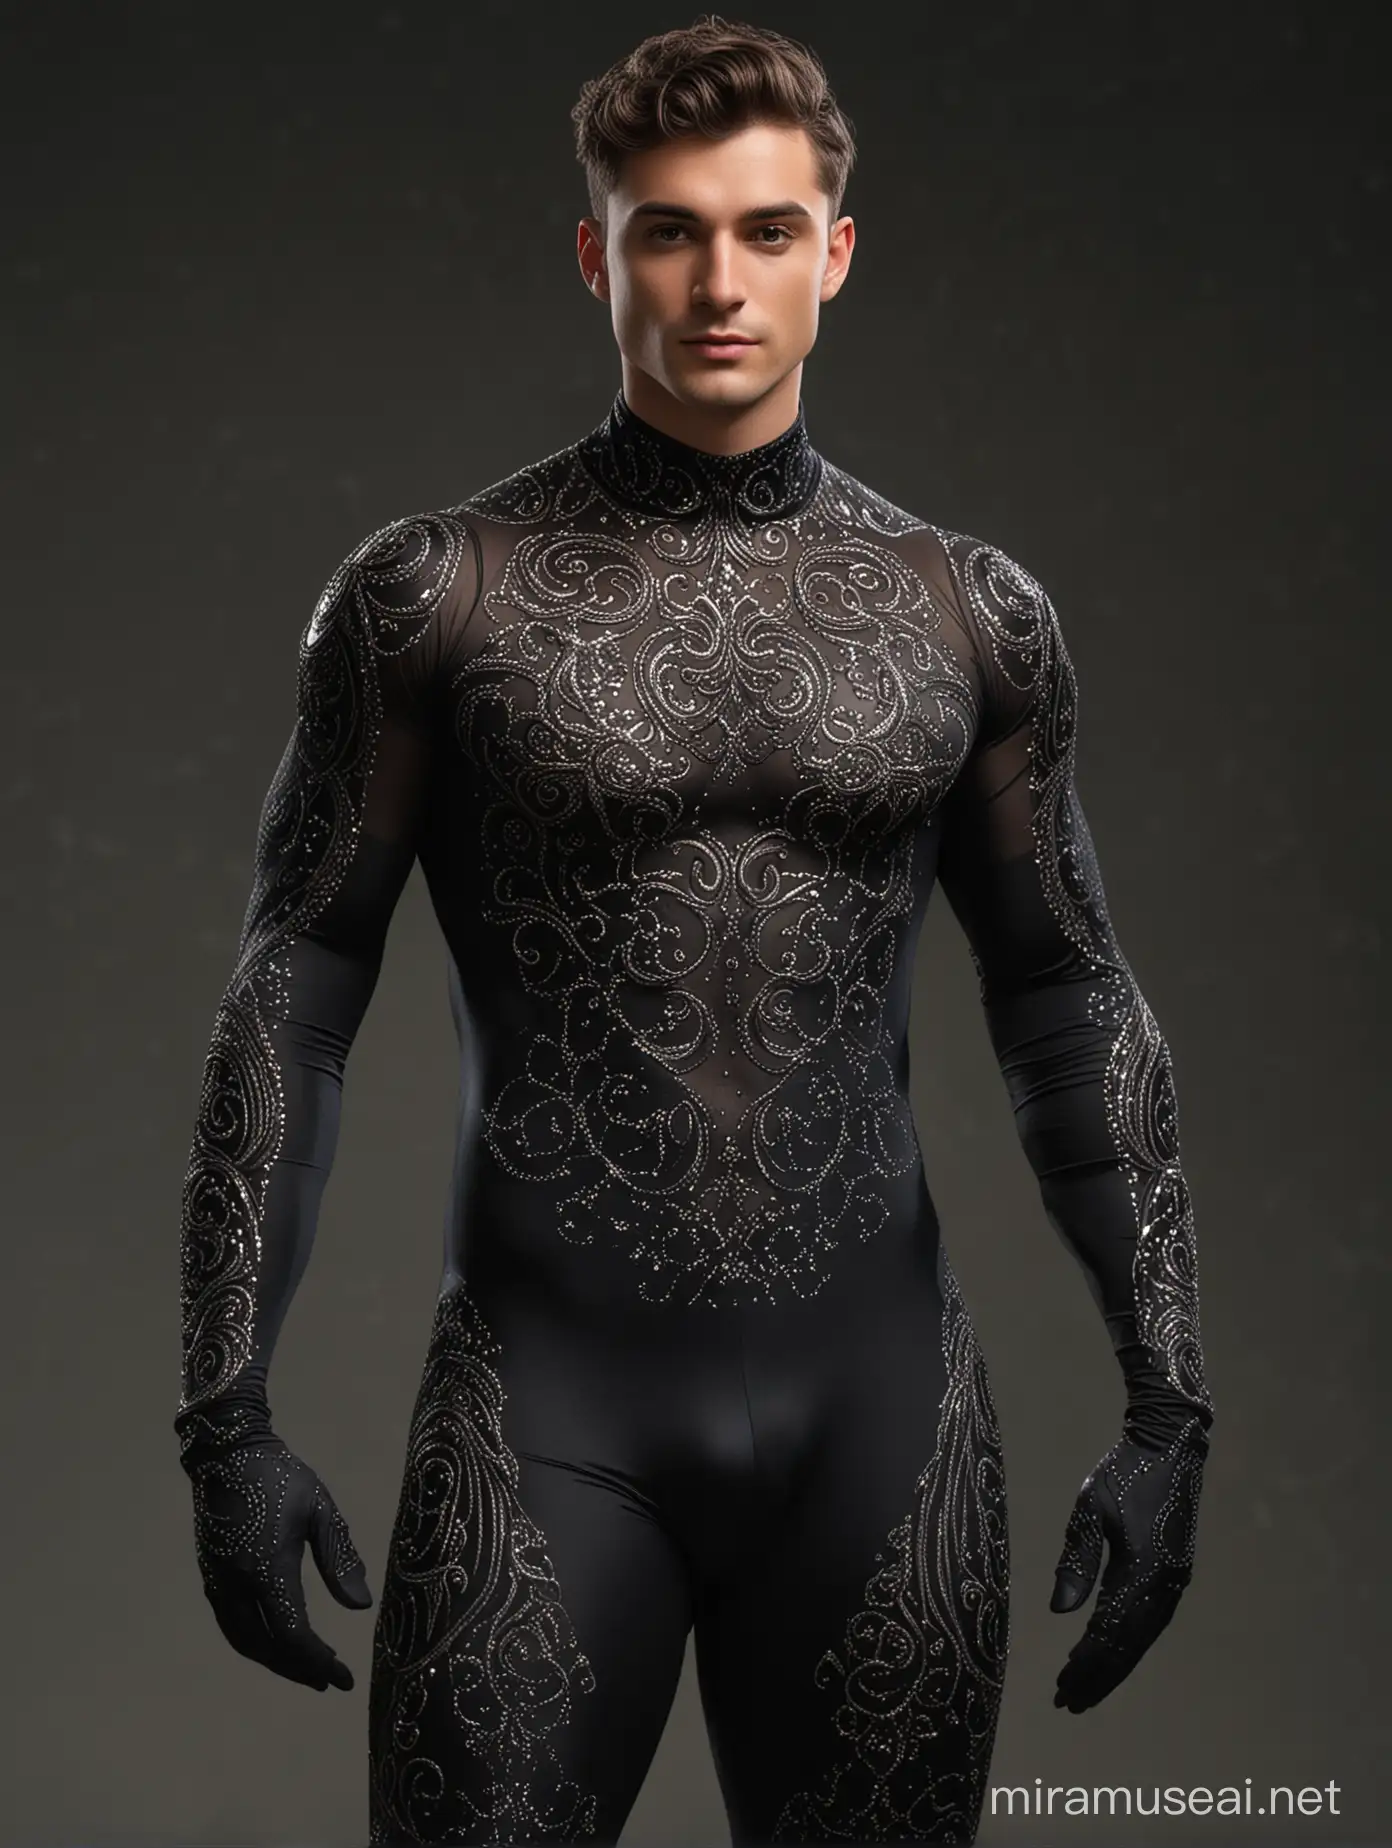 Full full body photorealistic ultra realism high definition aesthetic stabilized diffusion picture of handsome hunky fractal clean shaven  Zayne as celestial Islaw, wearing black swirls and twirl filigree sparkling biomorphic transparent overall tight fit spandex and gloves. standing in with hand on the hips.